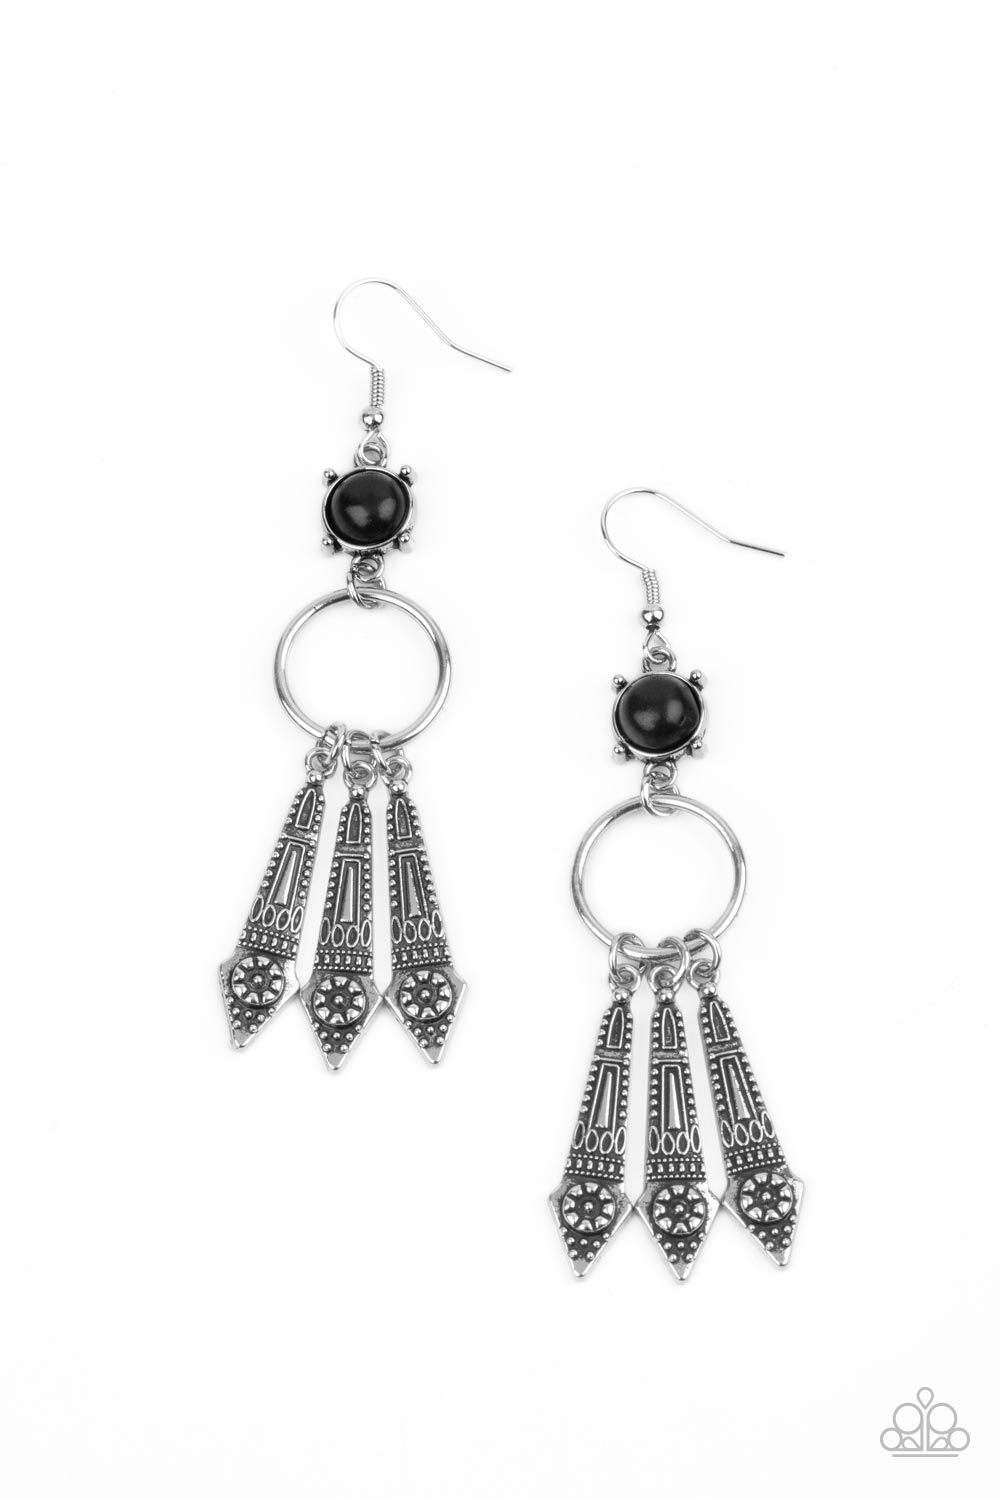 Prana Paradise - Black and Silver Earrings - Paparazzi Accessories ...